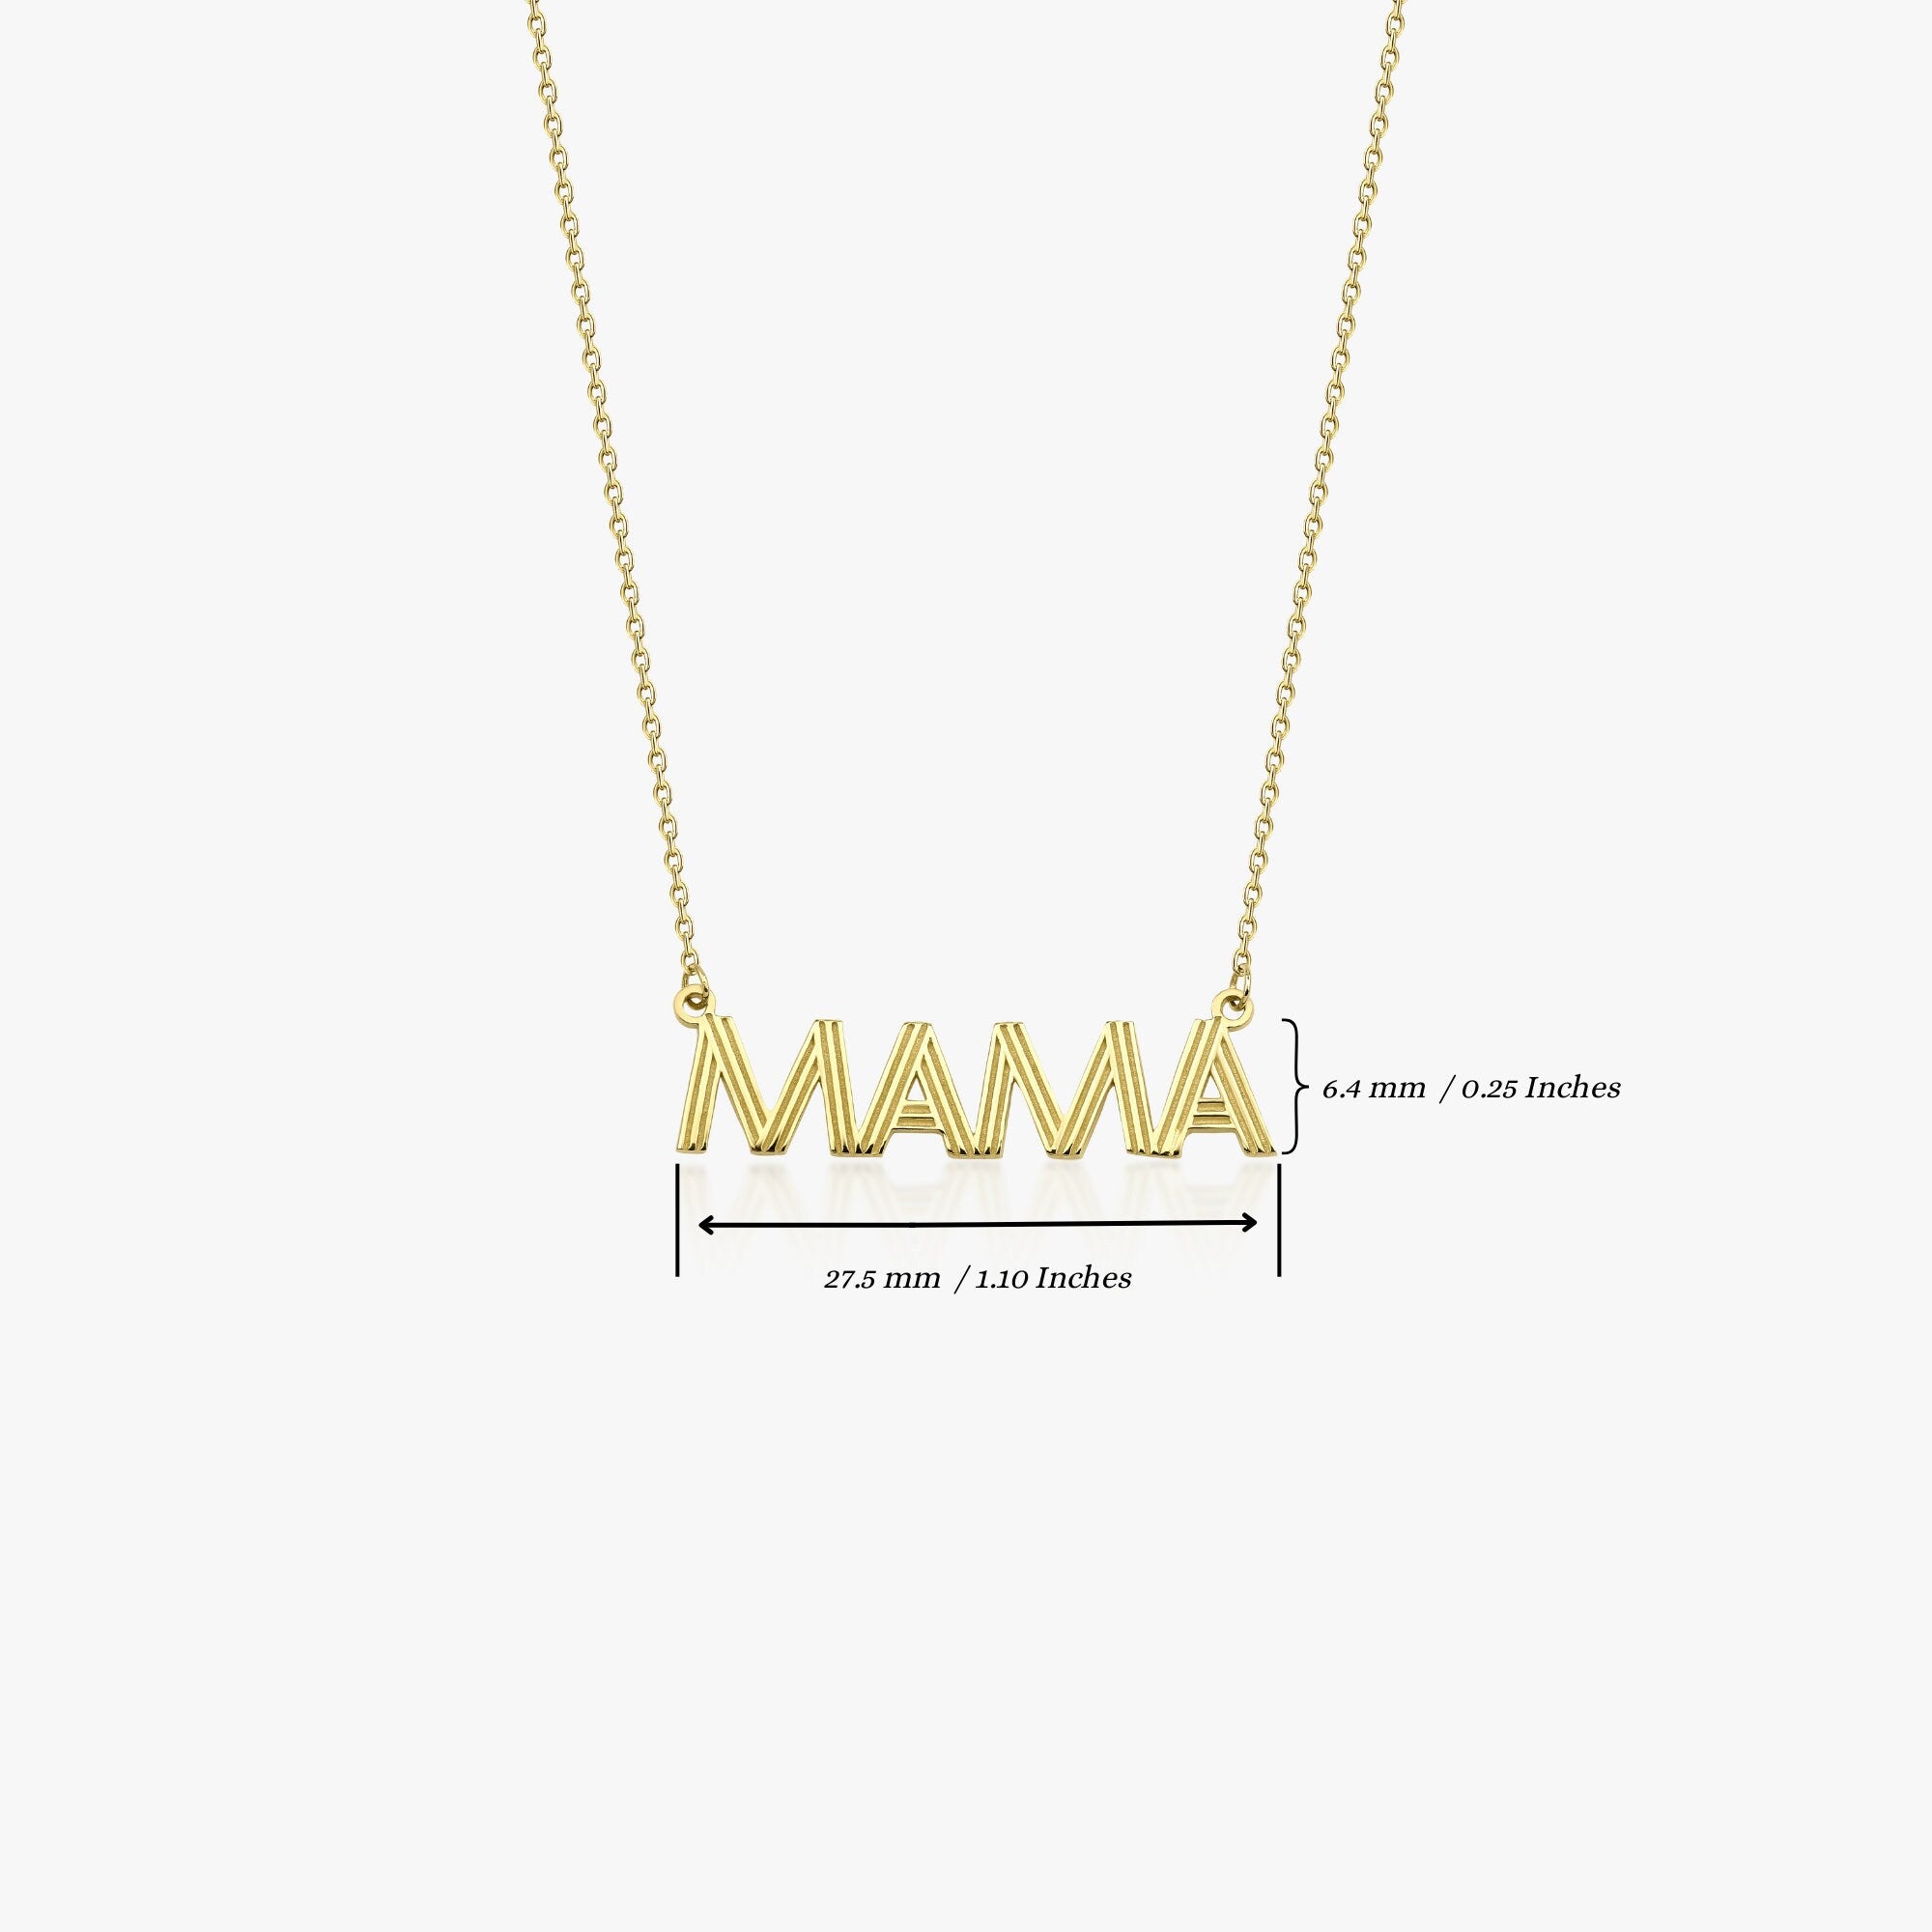 14K Gold Mama Necklace